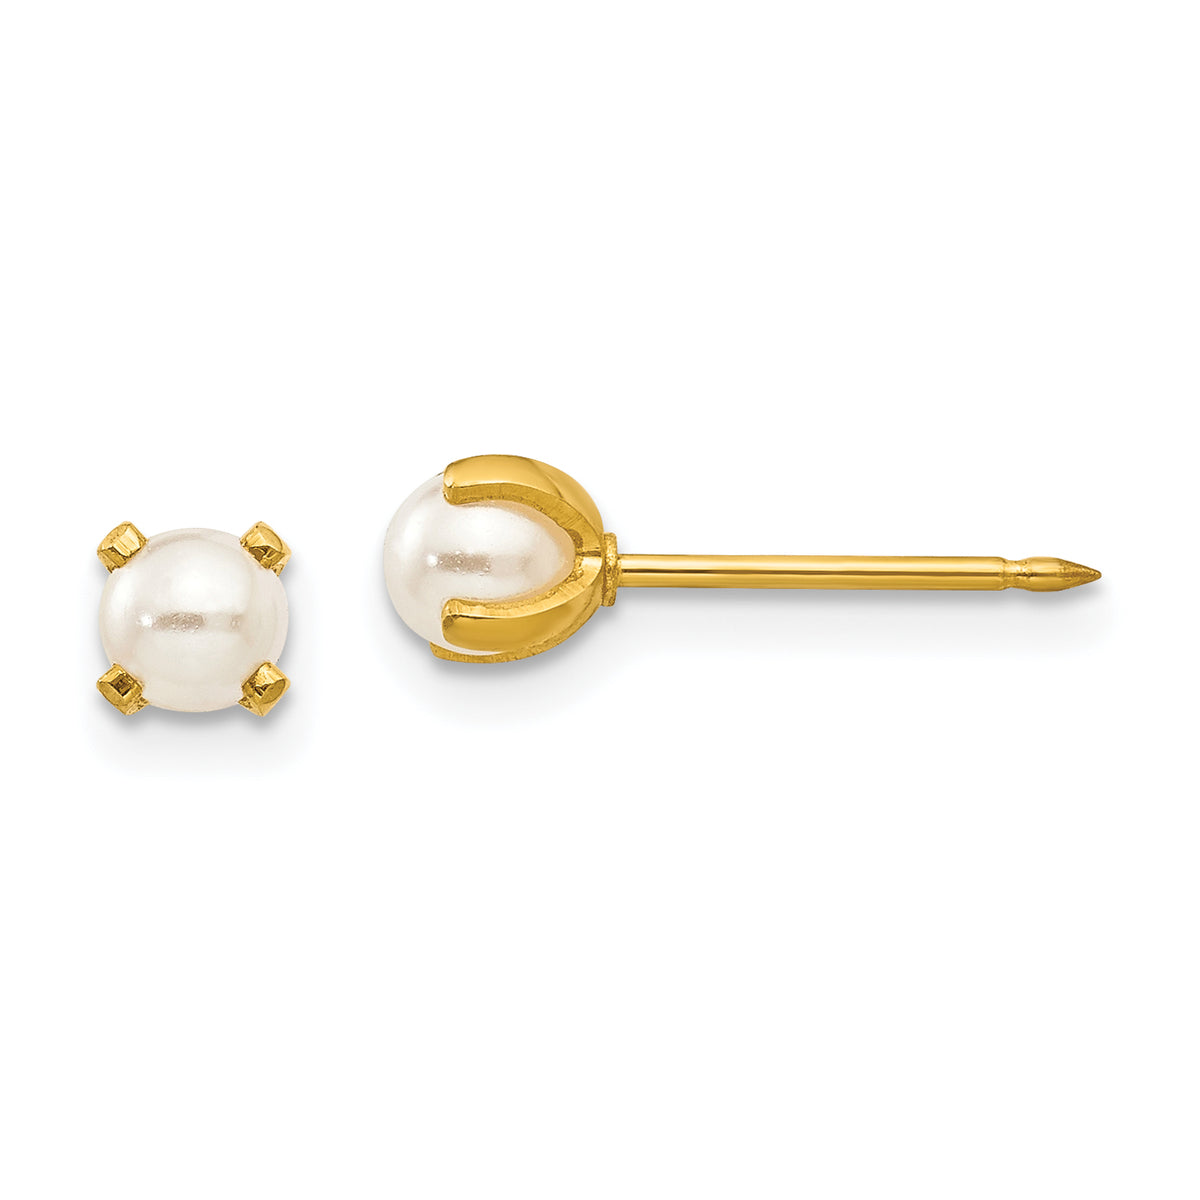 Inverness 24k Plated 4mm Simulated Pearl Earrings